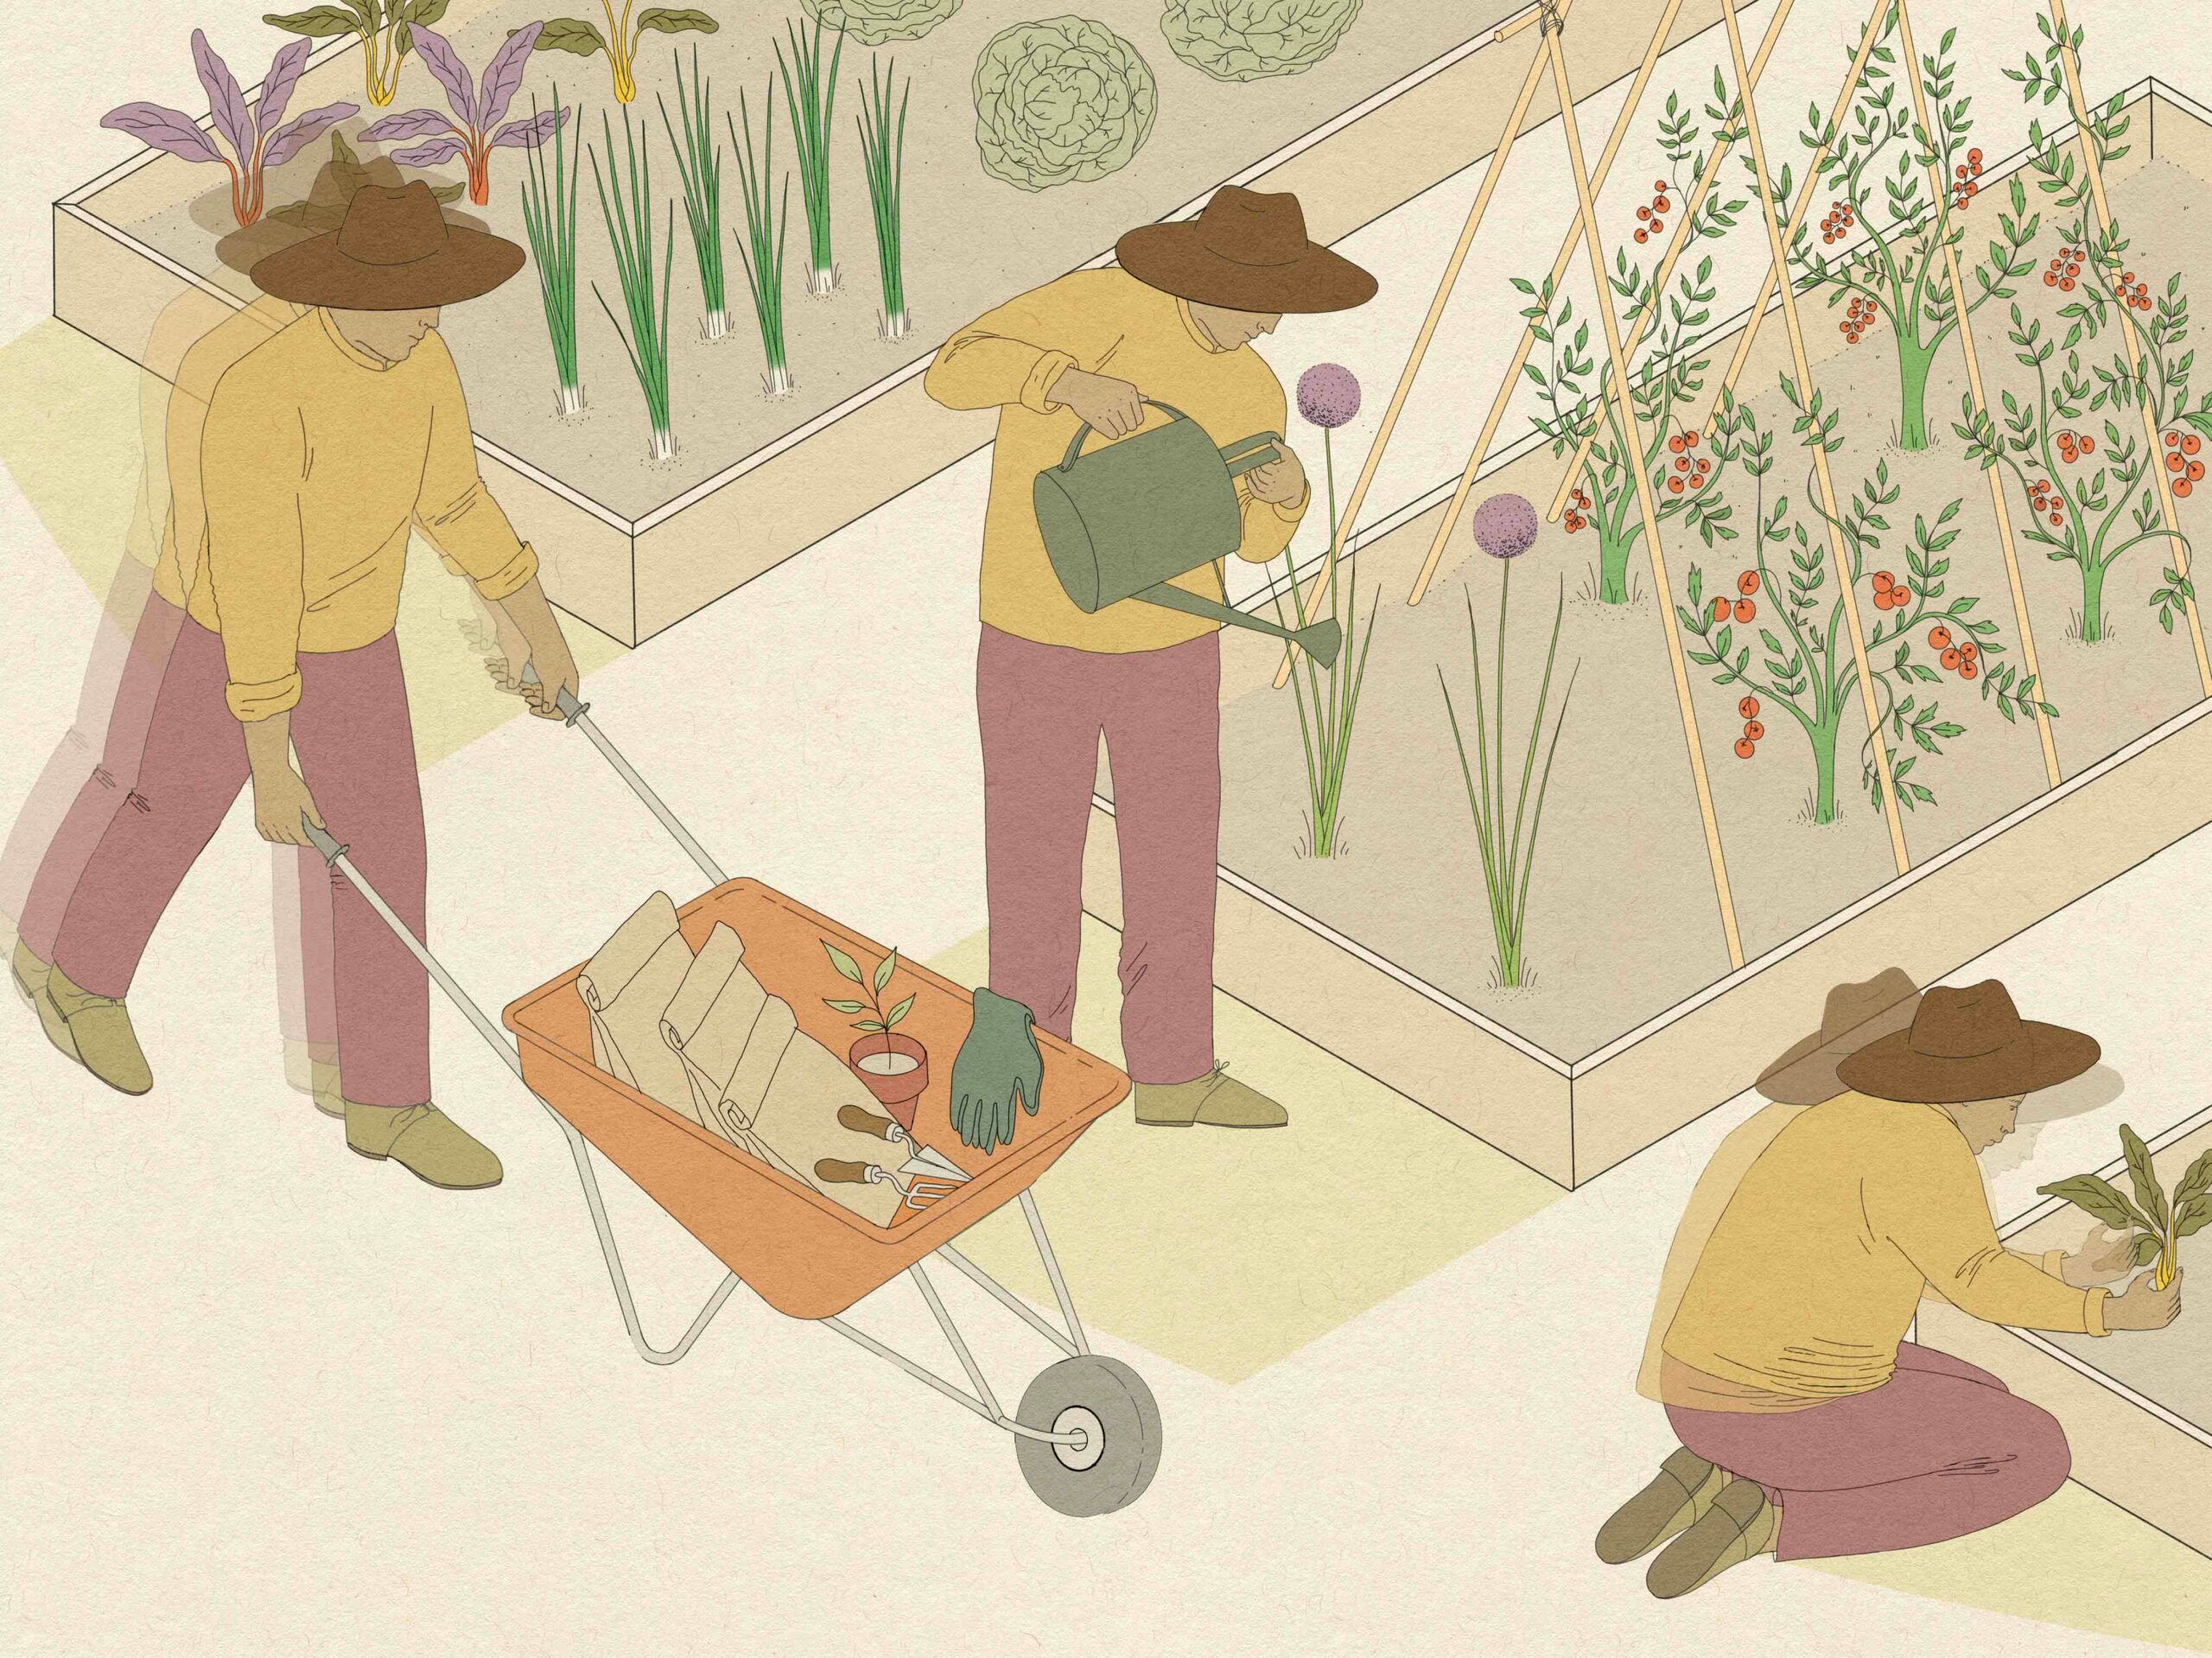 Illustration of three men gardening, one with a wheelbarrel of supplies, one water flowers and one planting flowers